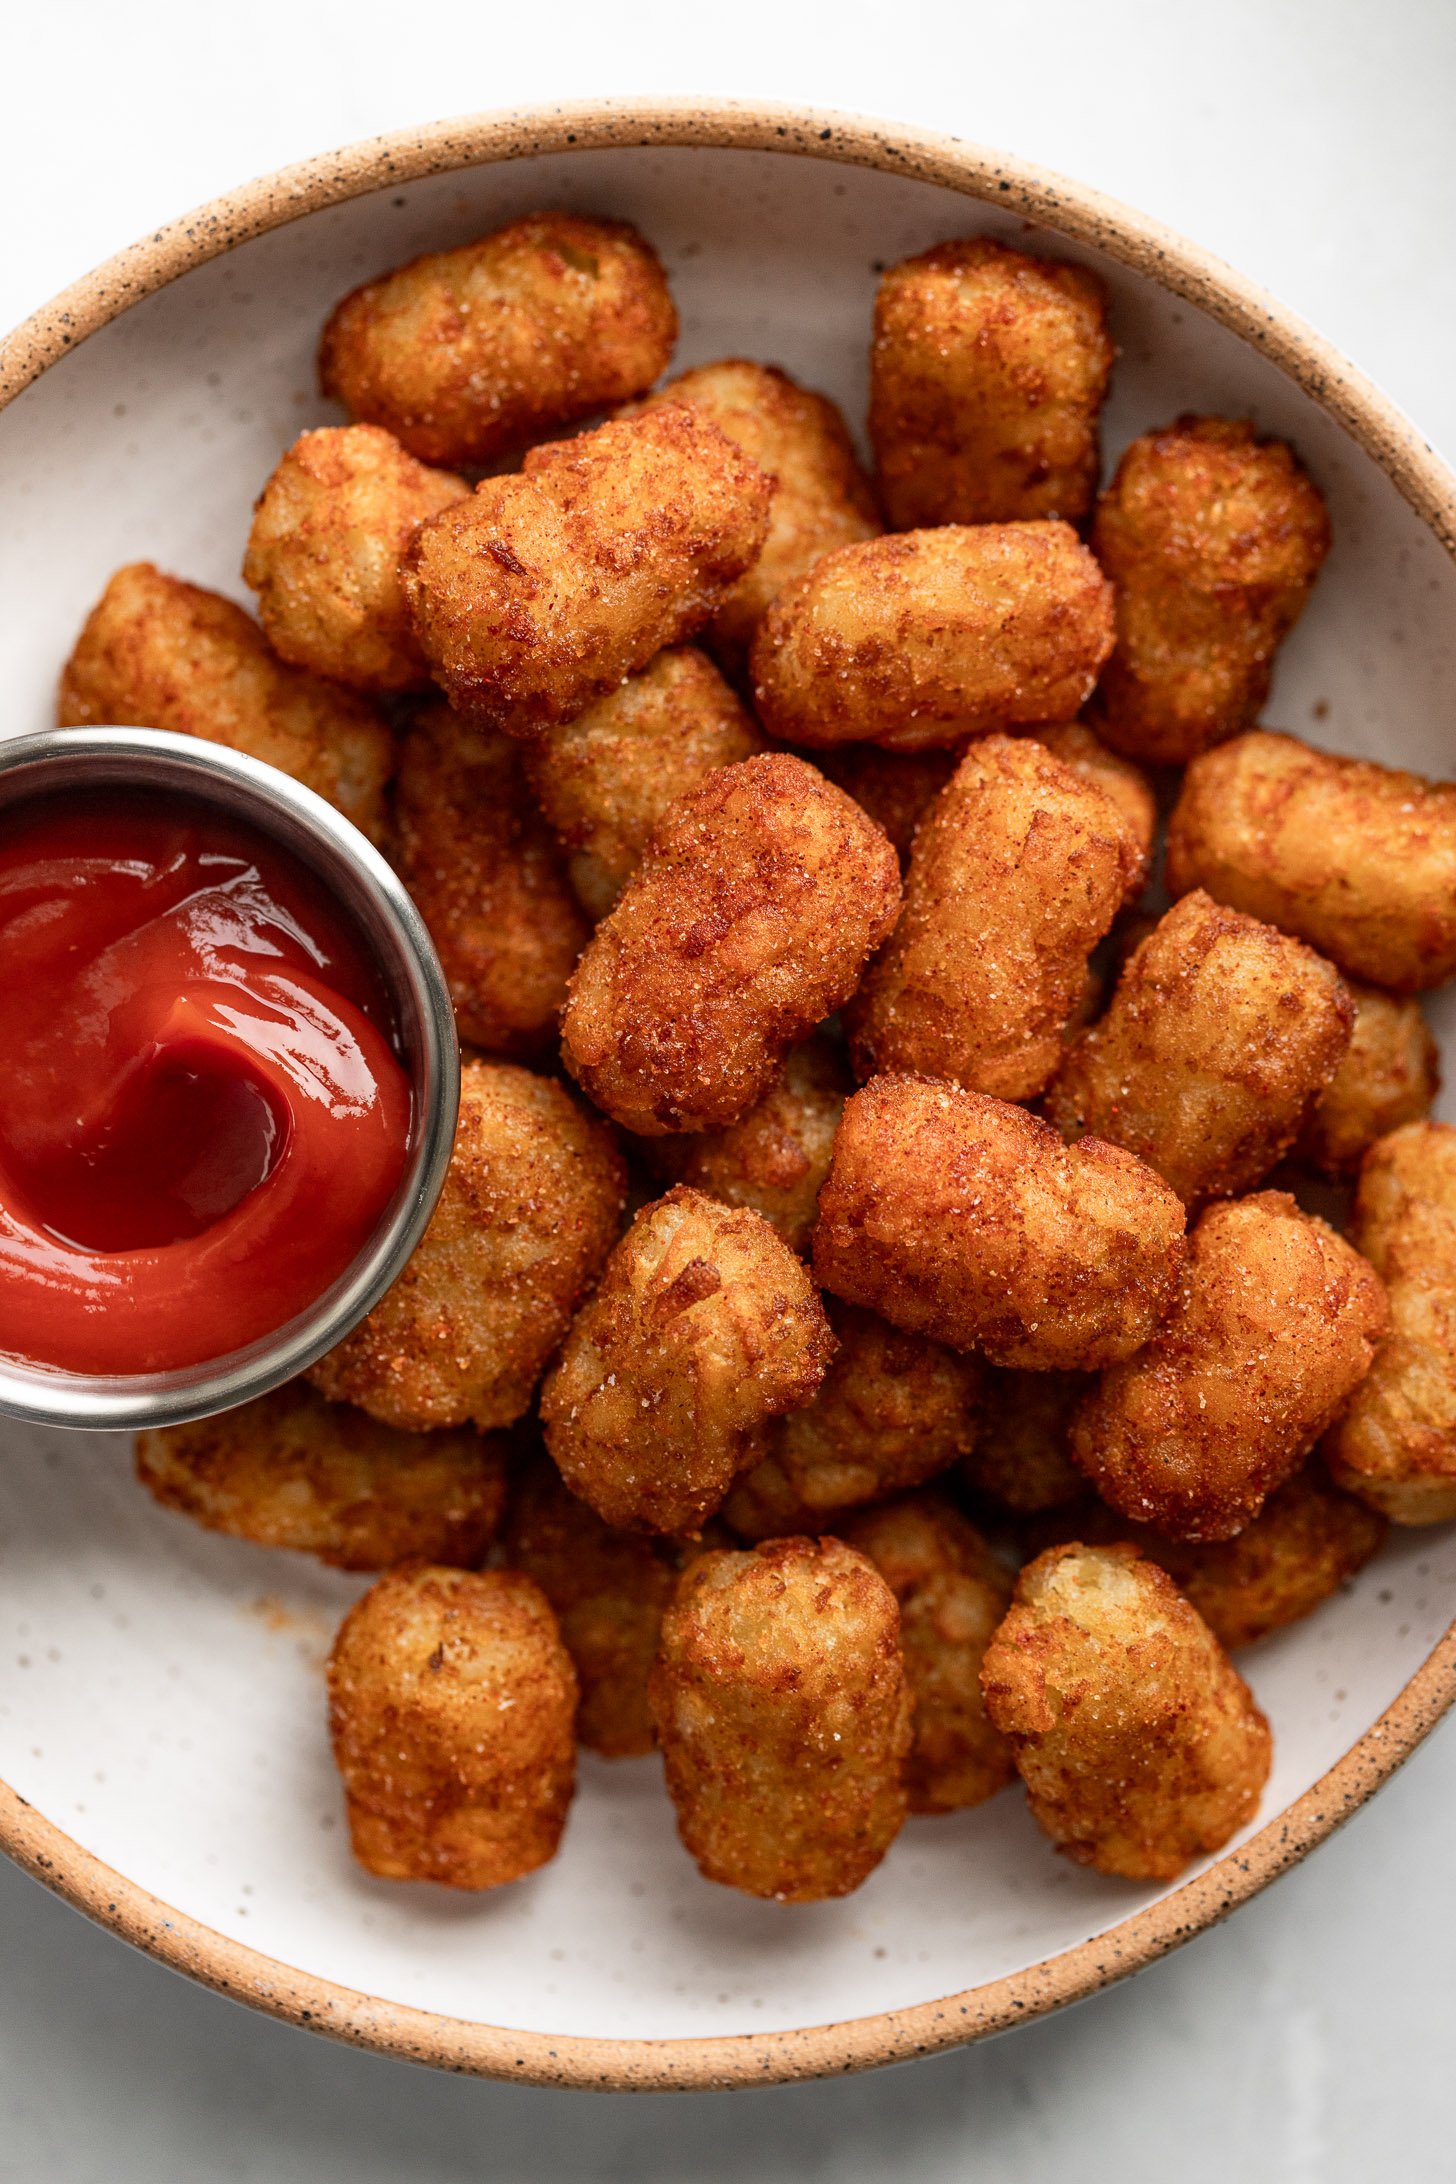 Plate of air fryer tater tots with ketchup.